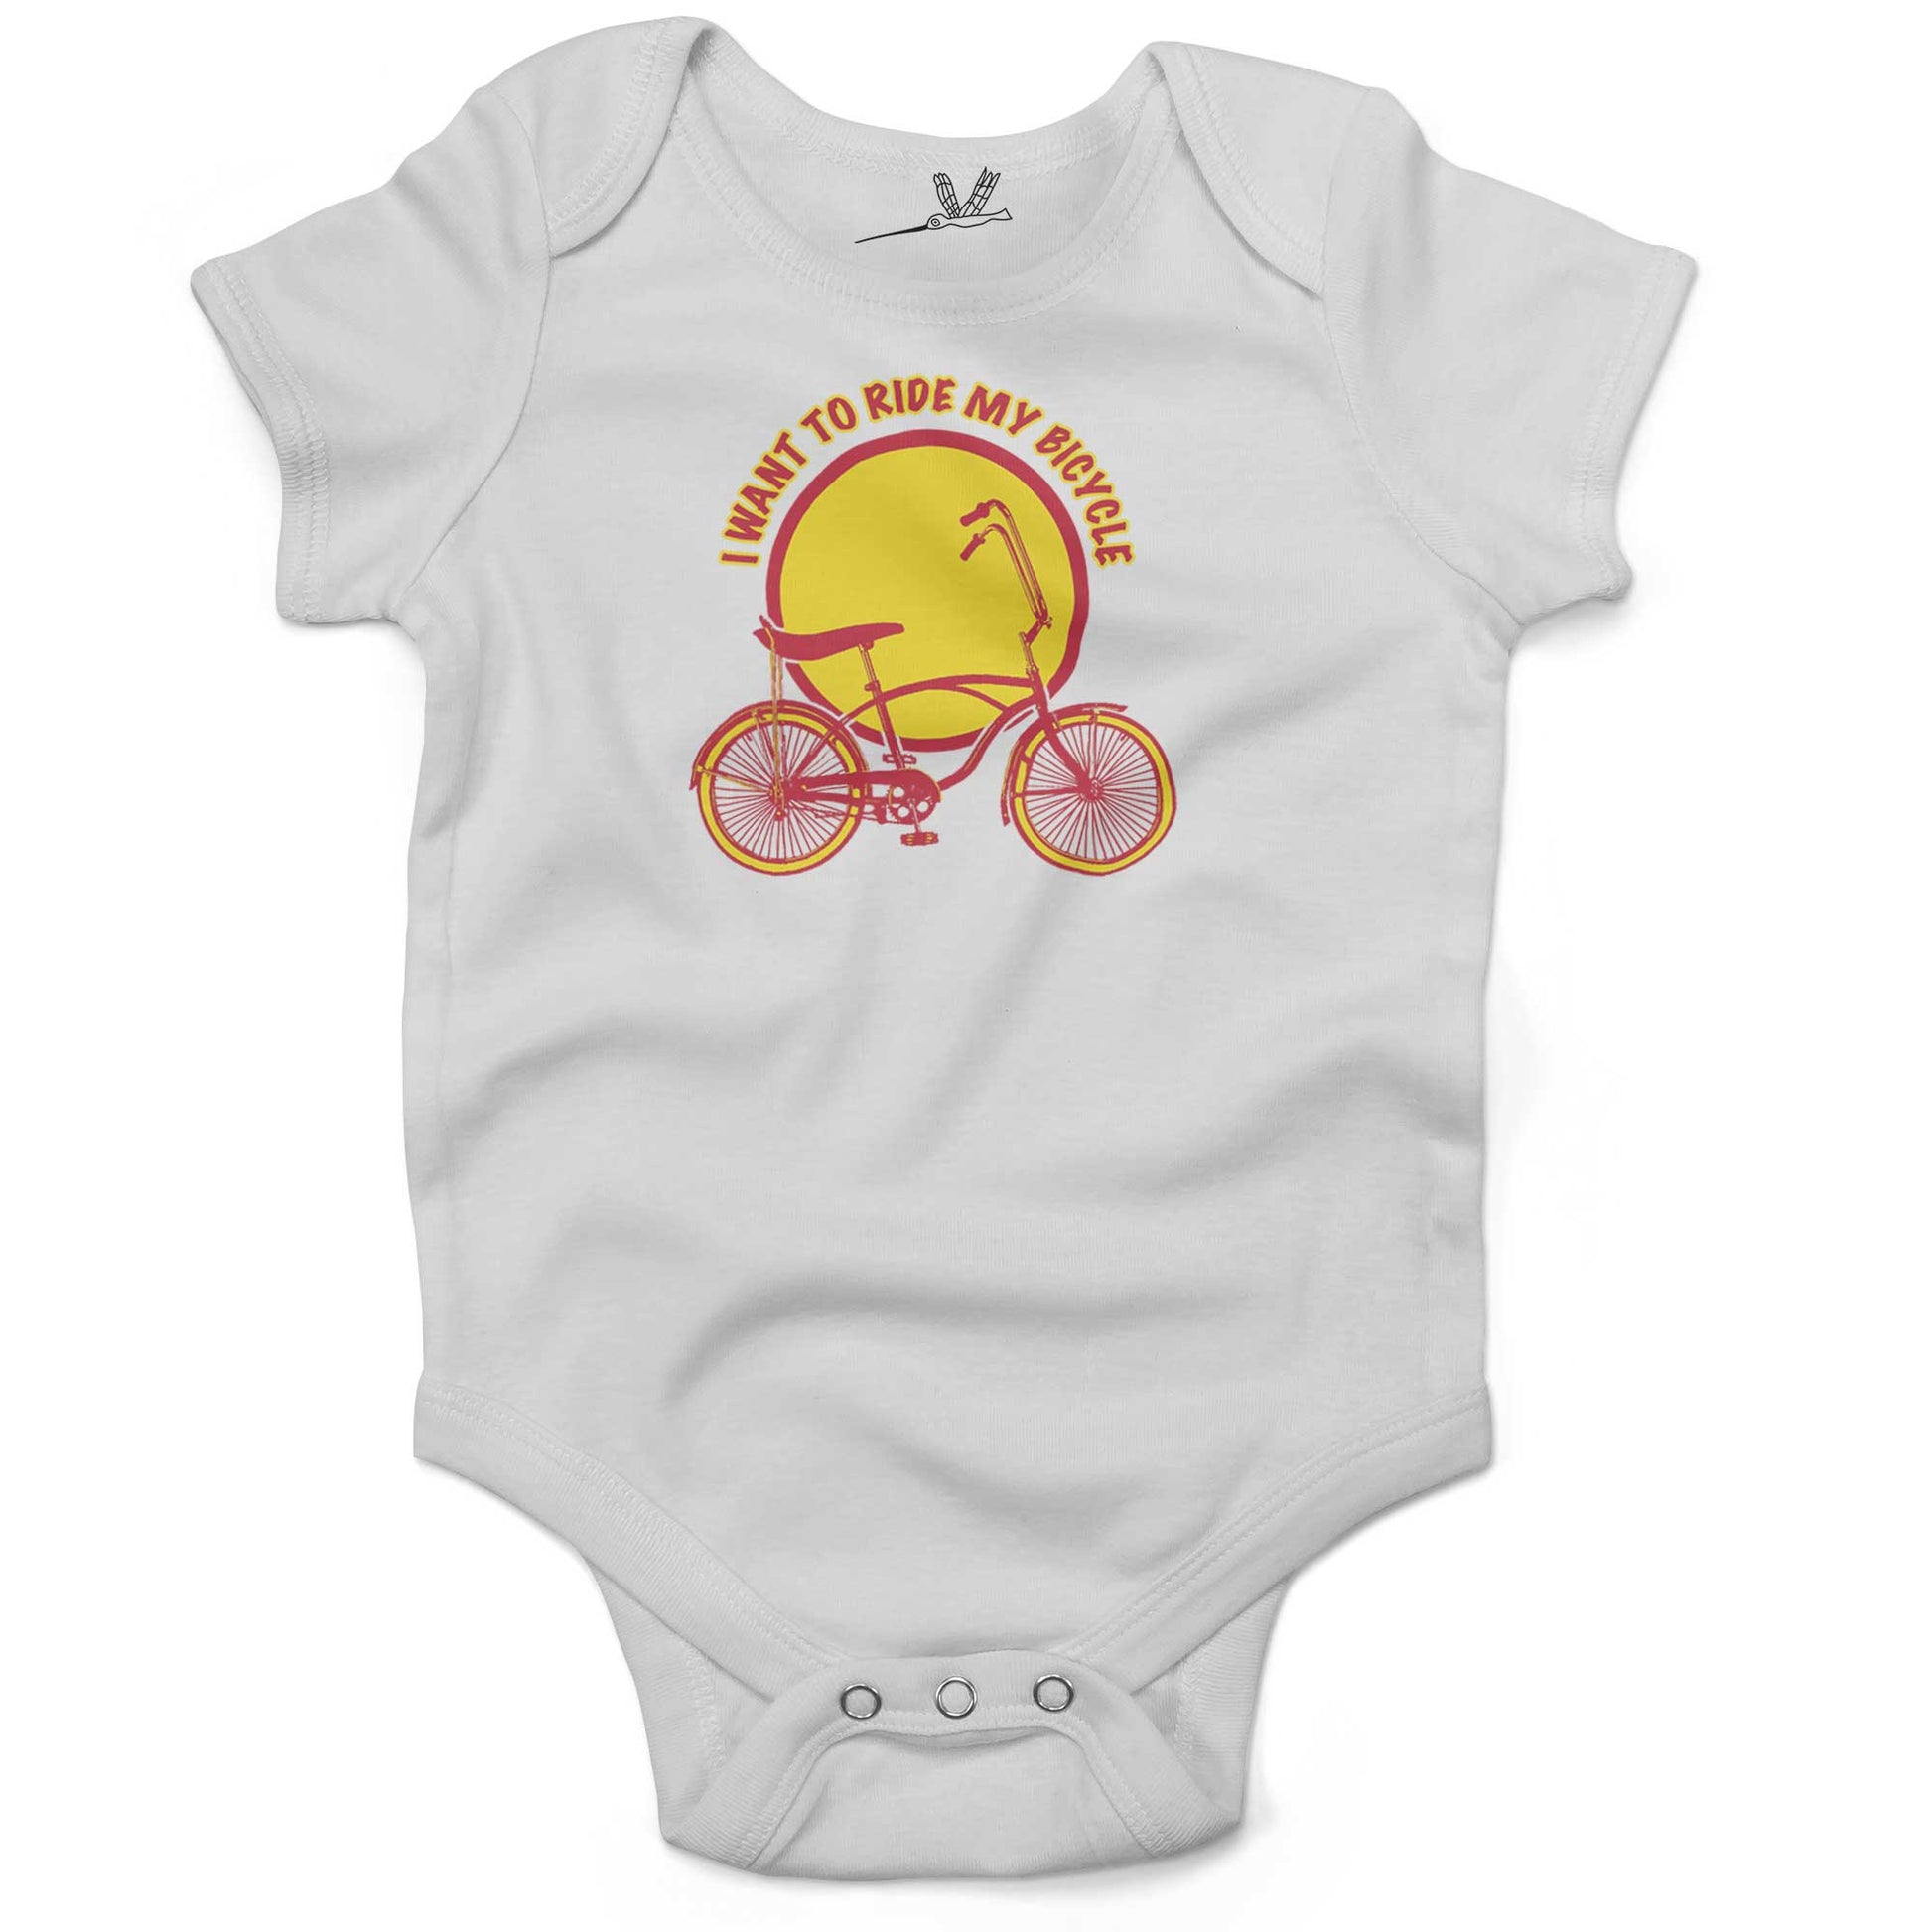 I Want To Ride My Bicycle Infant Bodysuit or Raglan Baby Tee-White-3-6 months